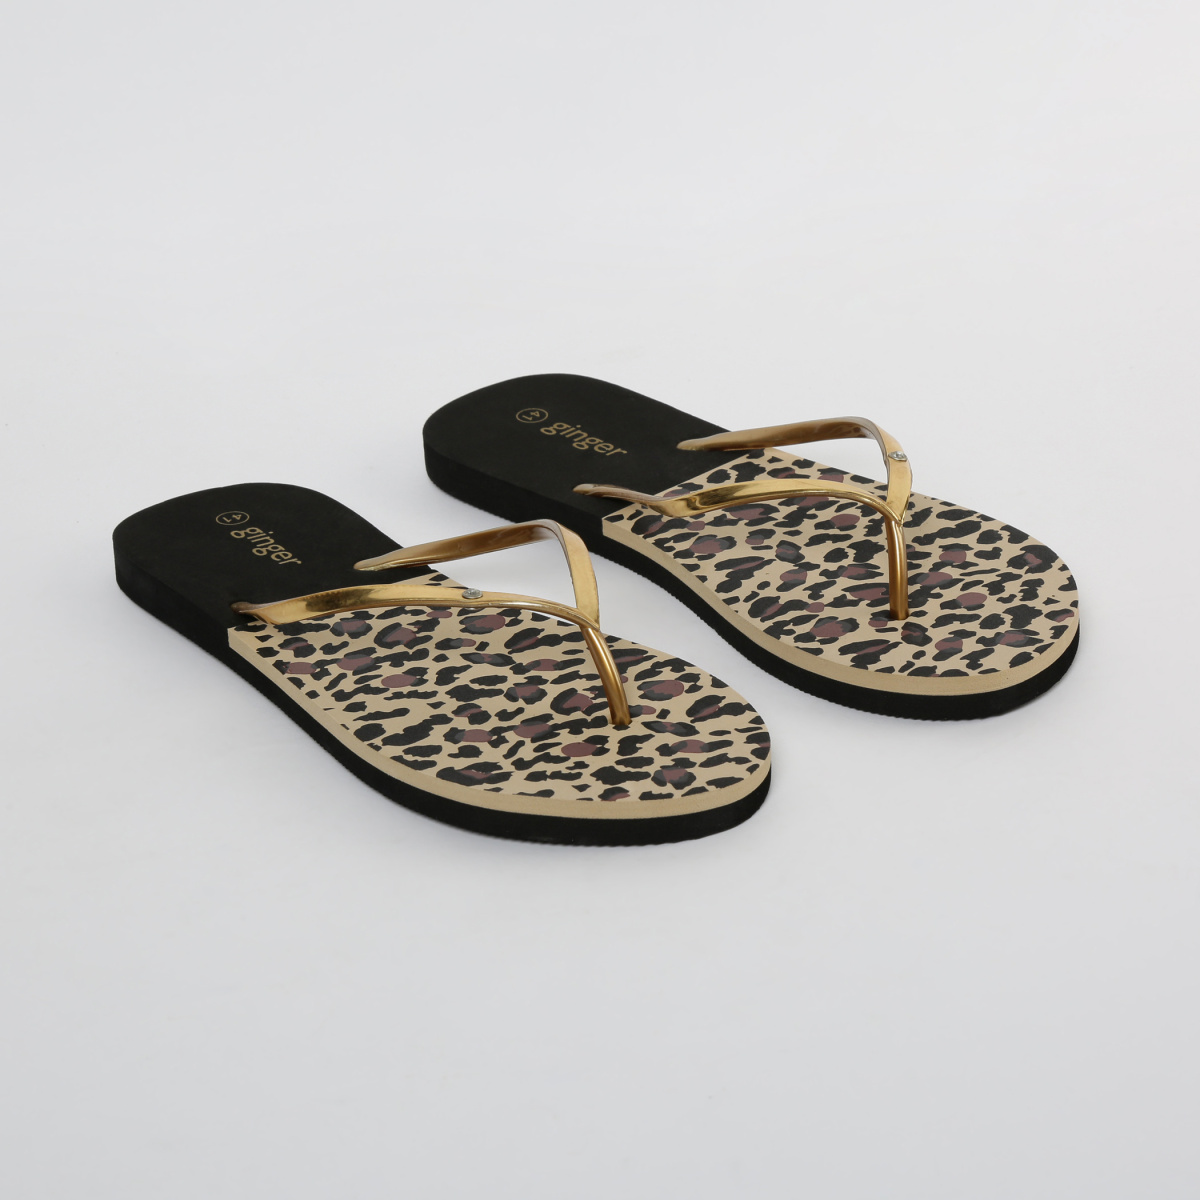 GINGER Animal Print Slippers with Embellishment